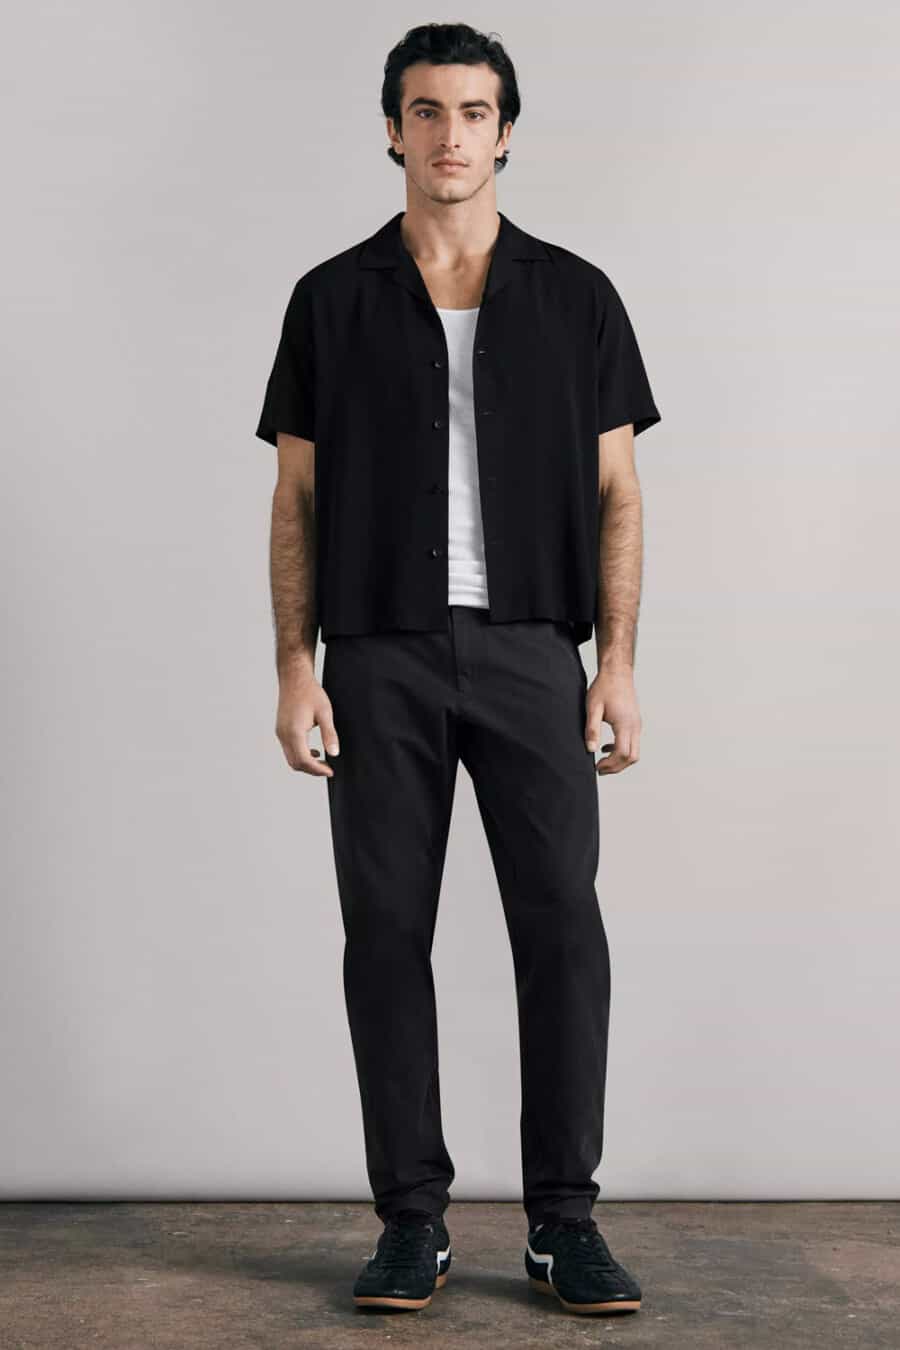 Men's black pants, white T-shirt, open black short-sleeve shirt and black sneakers outfit